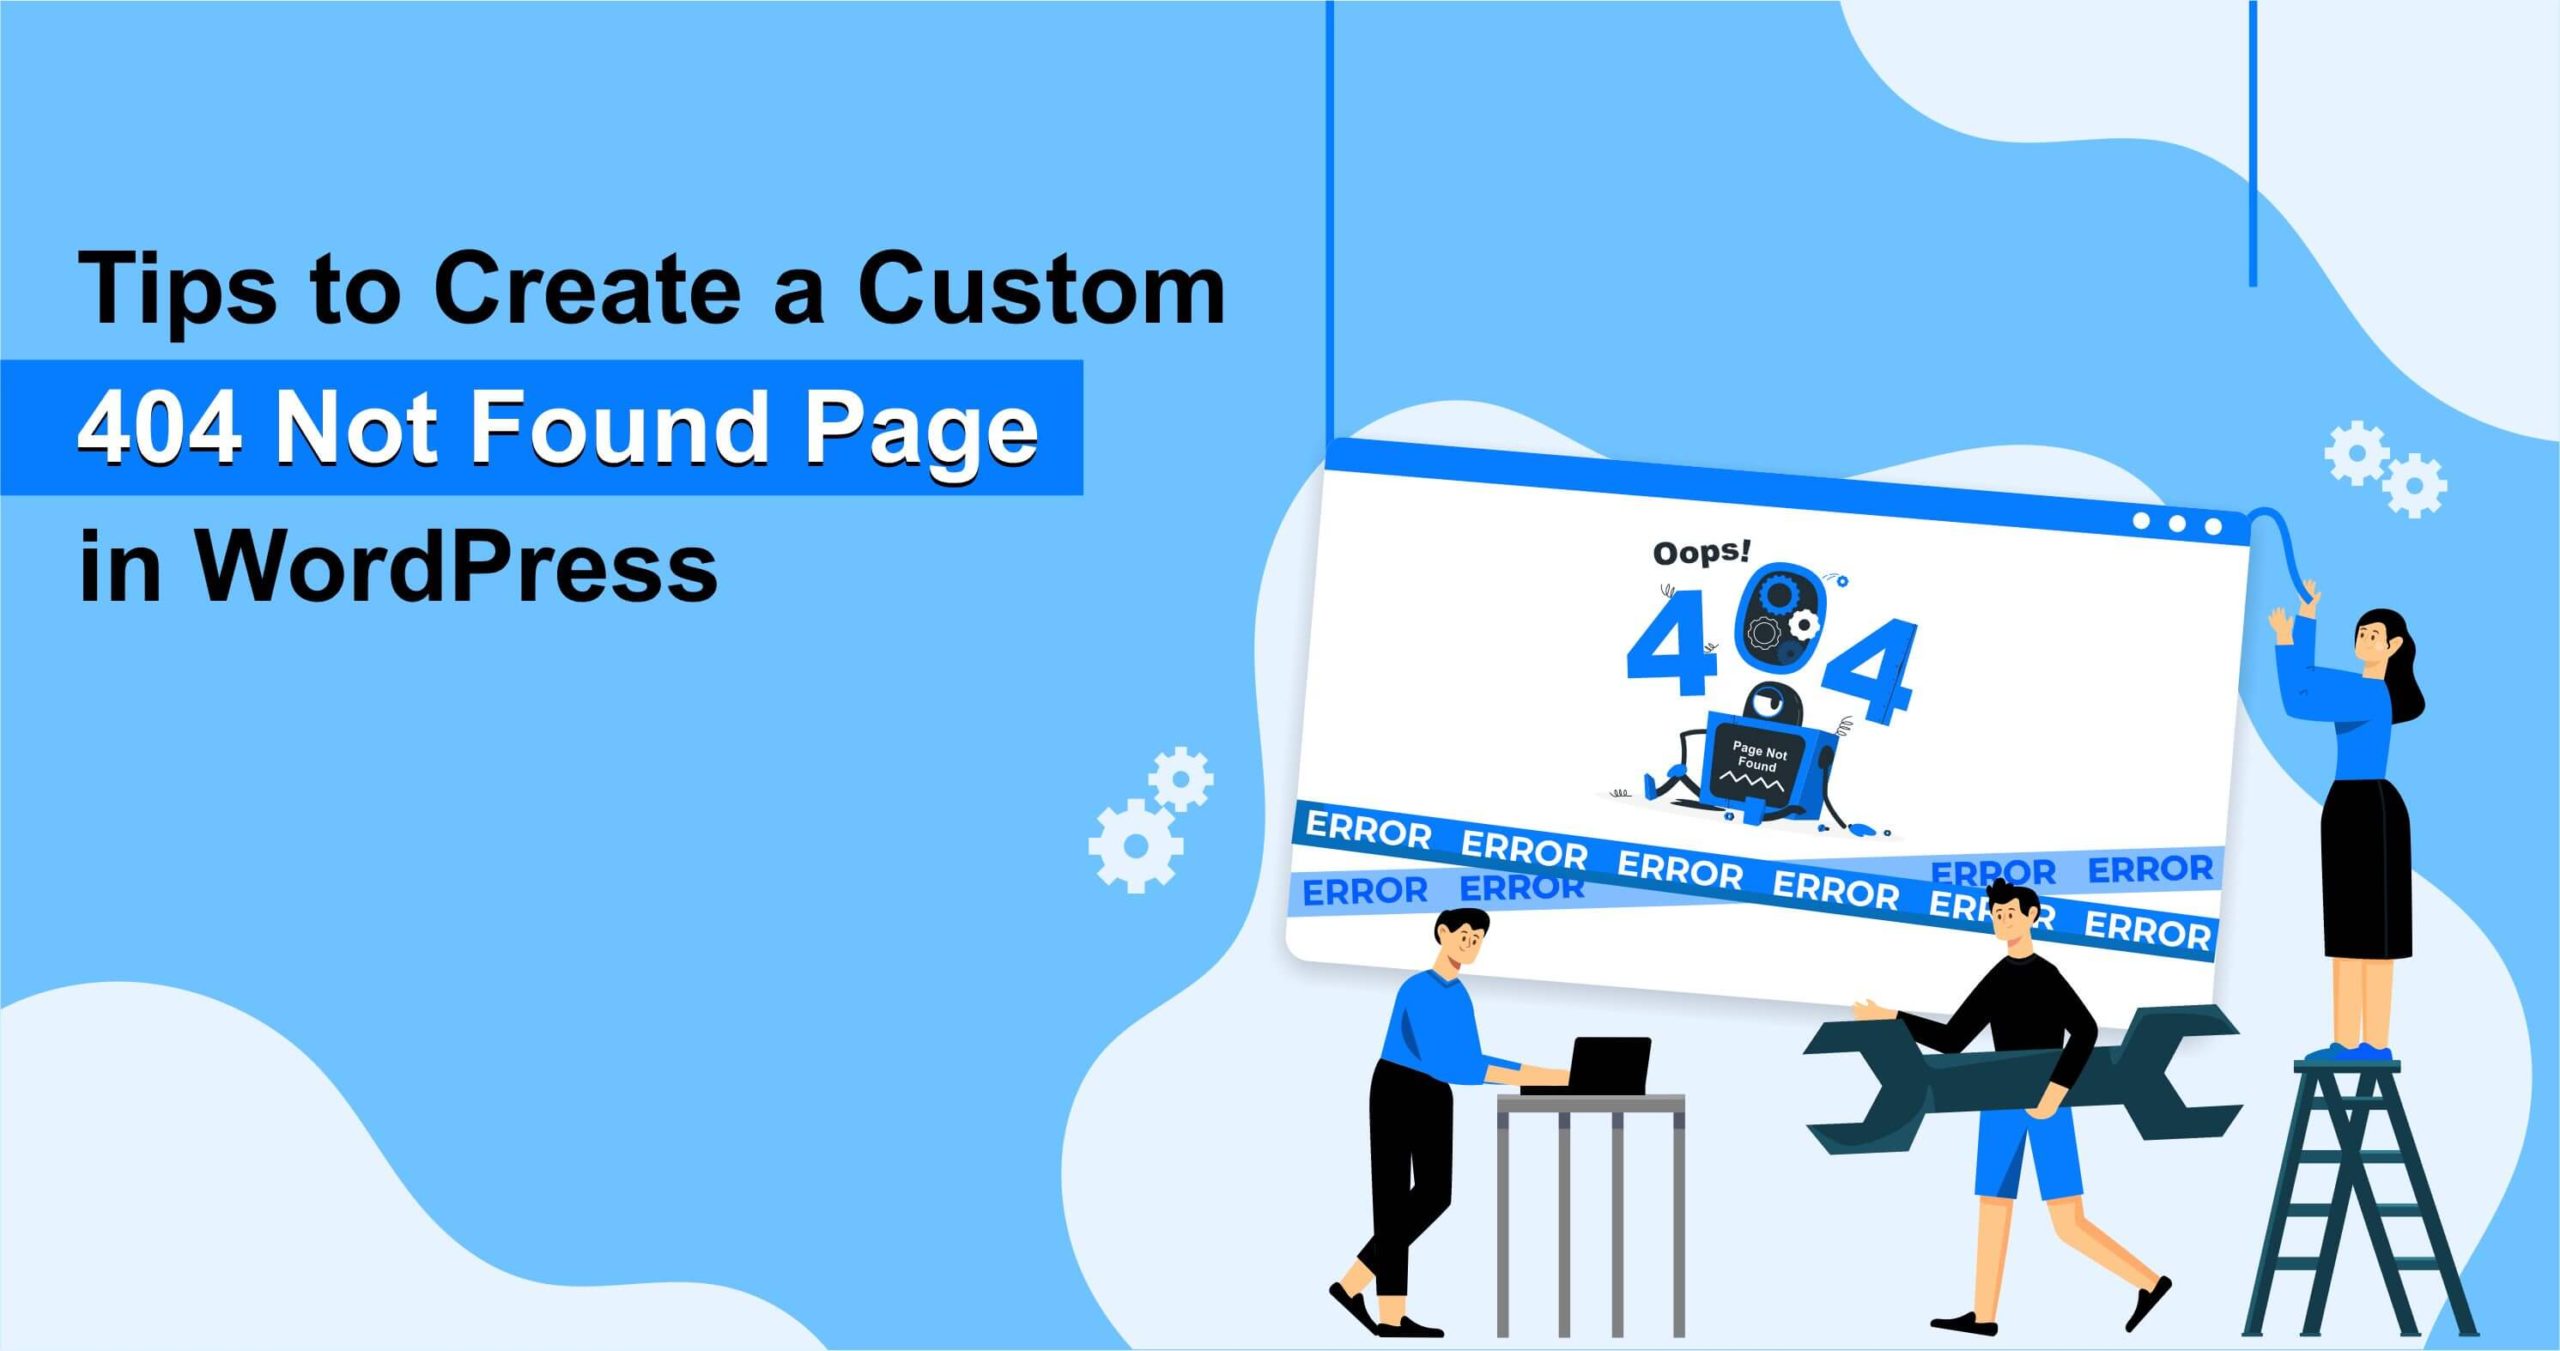 Tips to Create a Custom 404 Not Found Page in WordPress